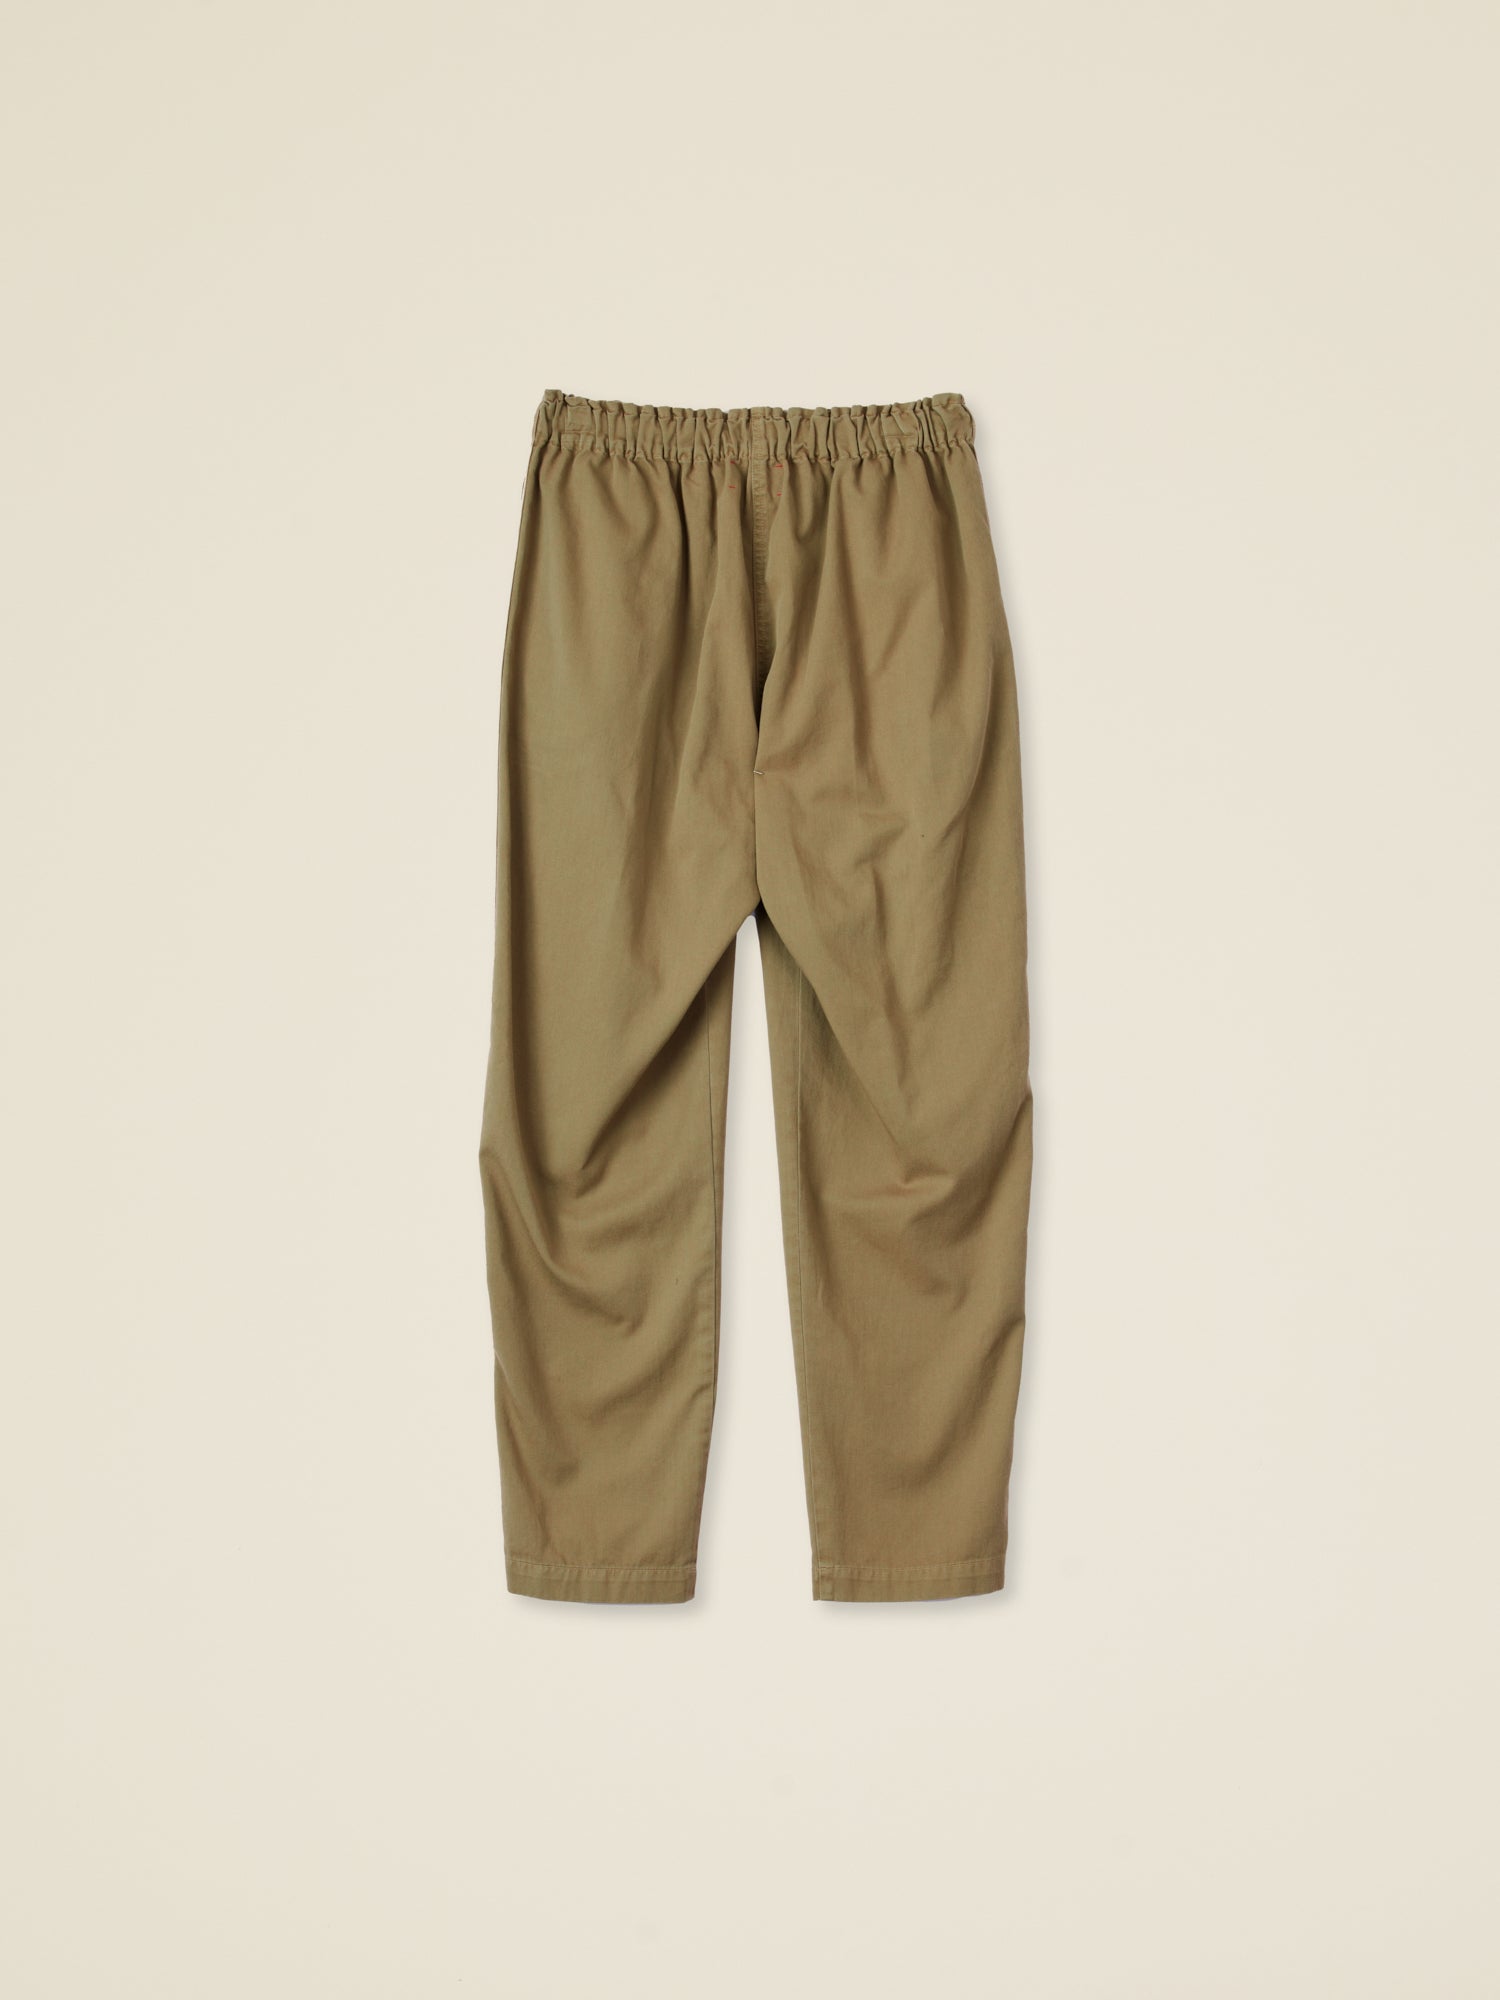 The Xirena Rex Pant in Misted Moss available at The New Trend Australia